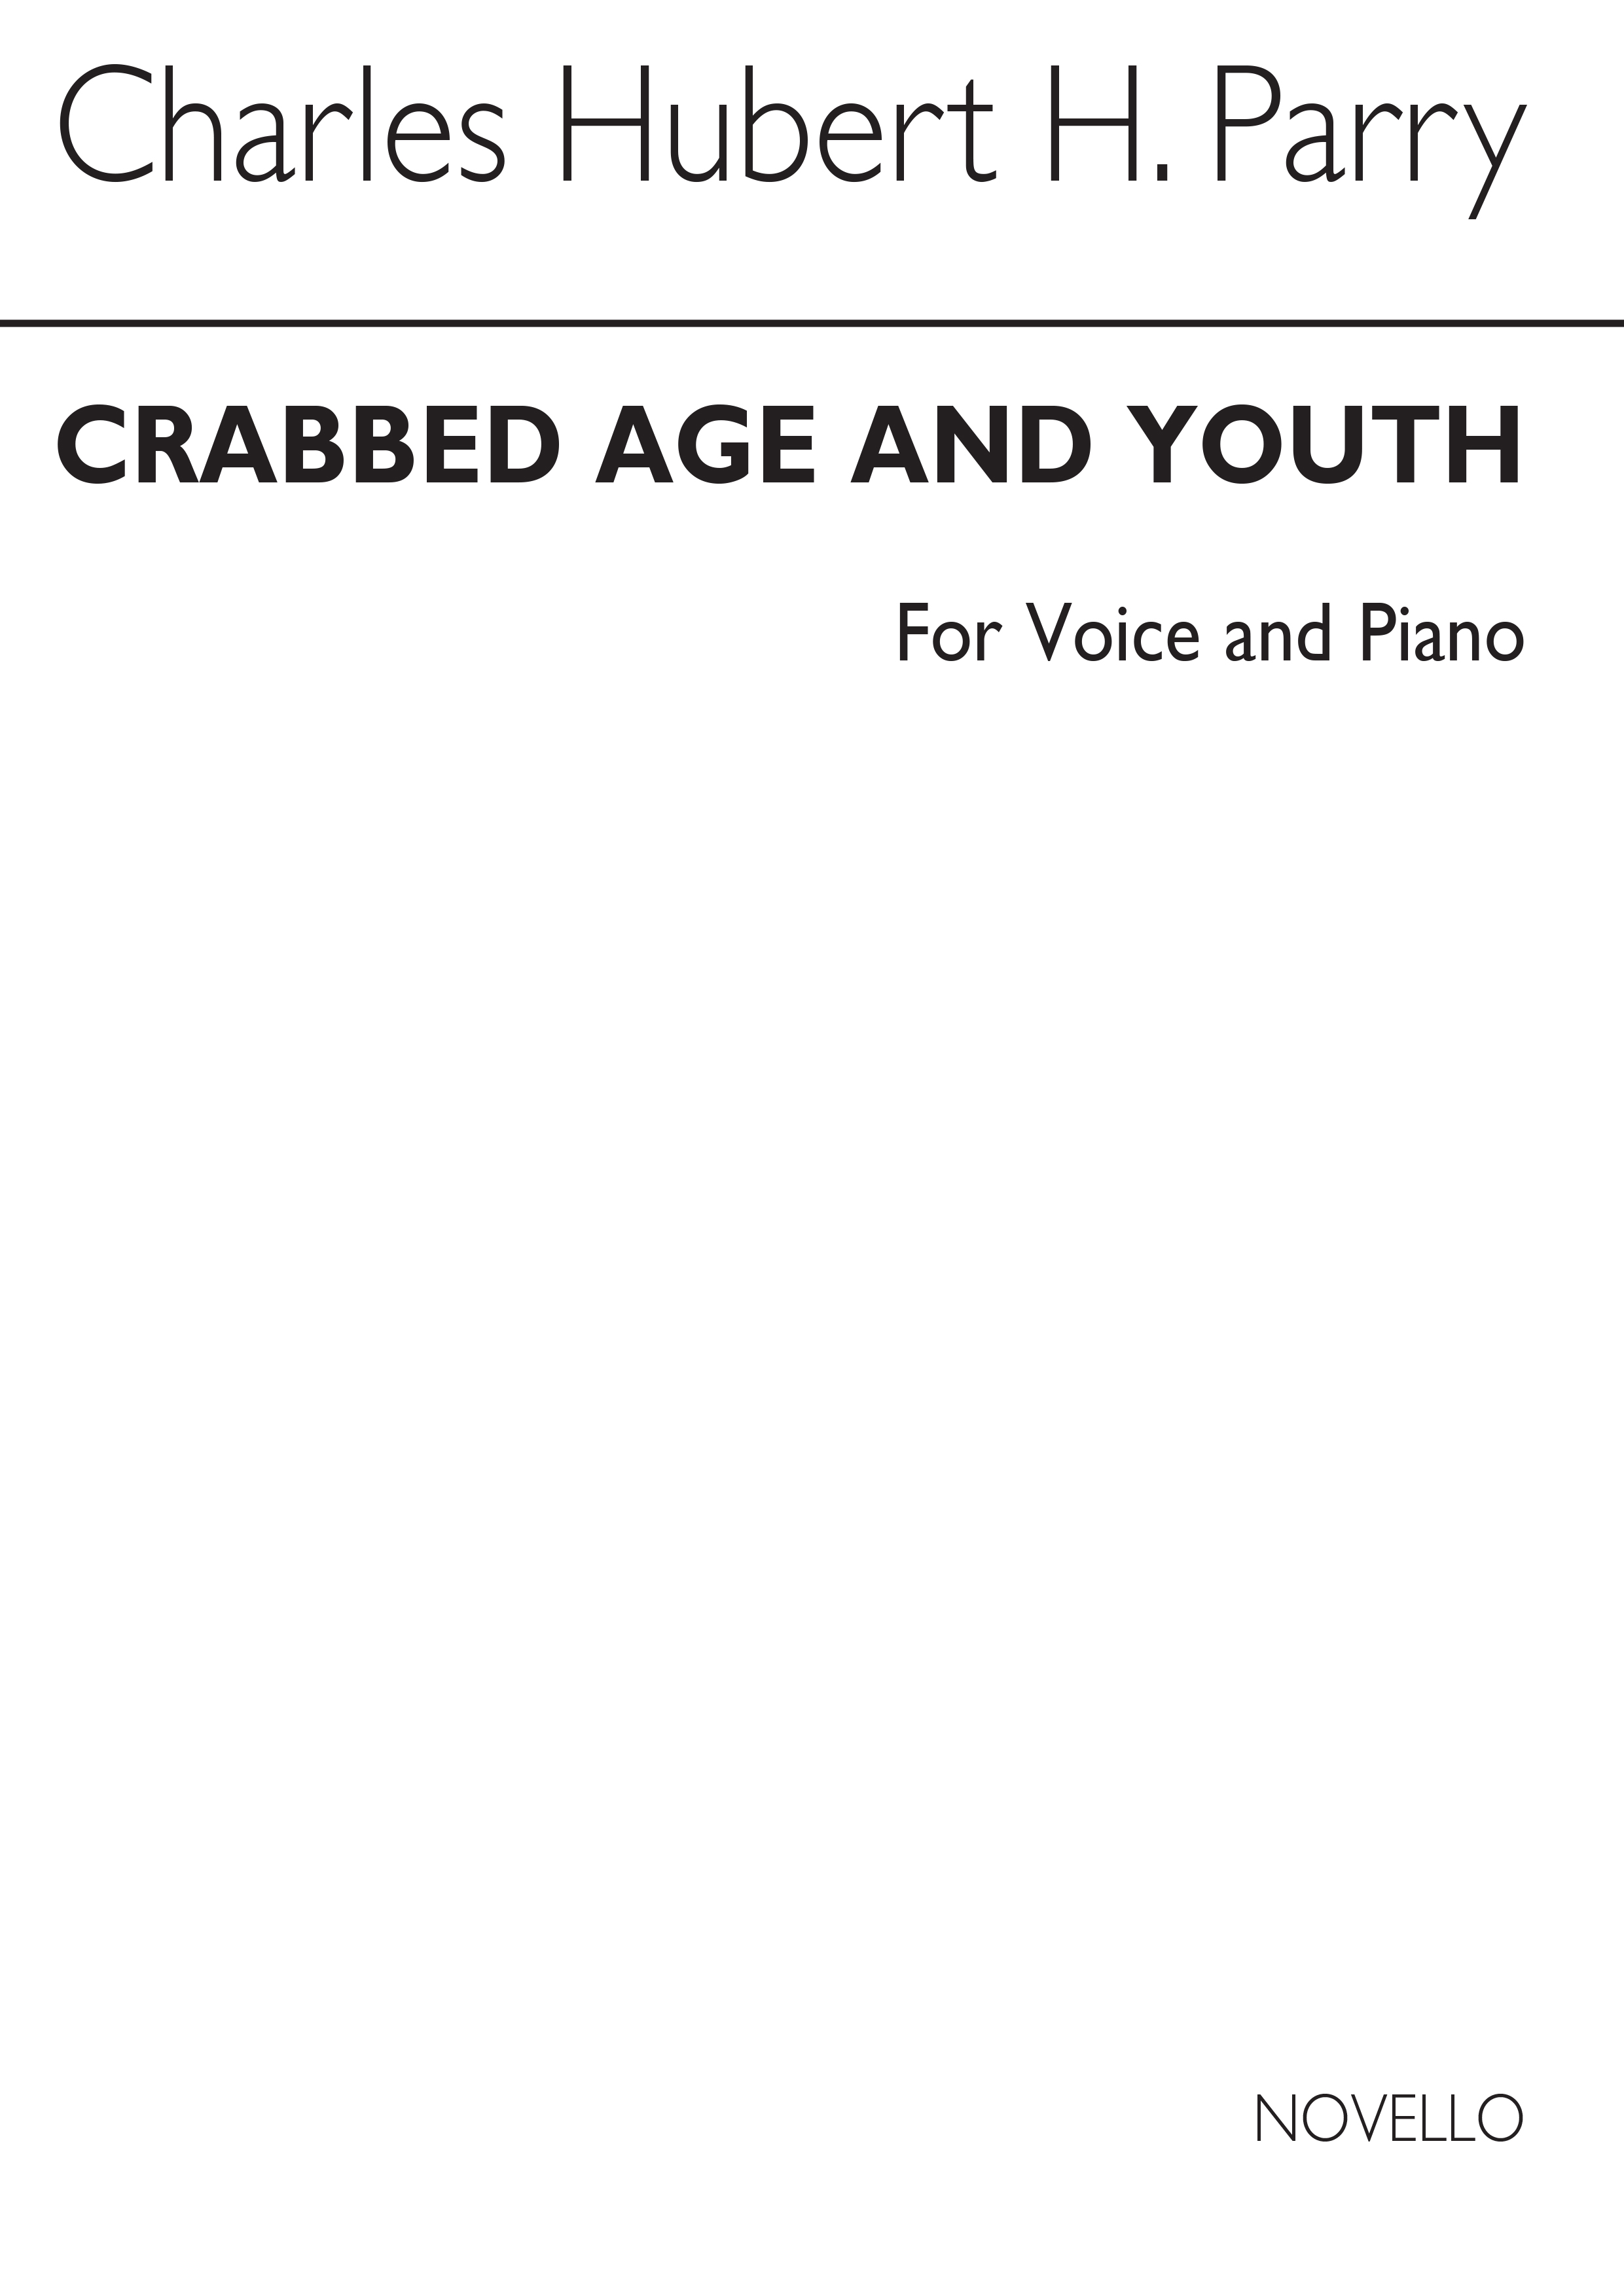 C. Hubert Parry: Crabbed Age And Youth